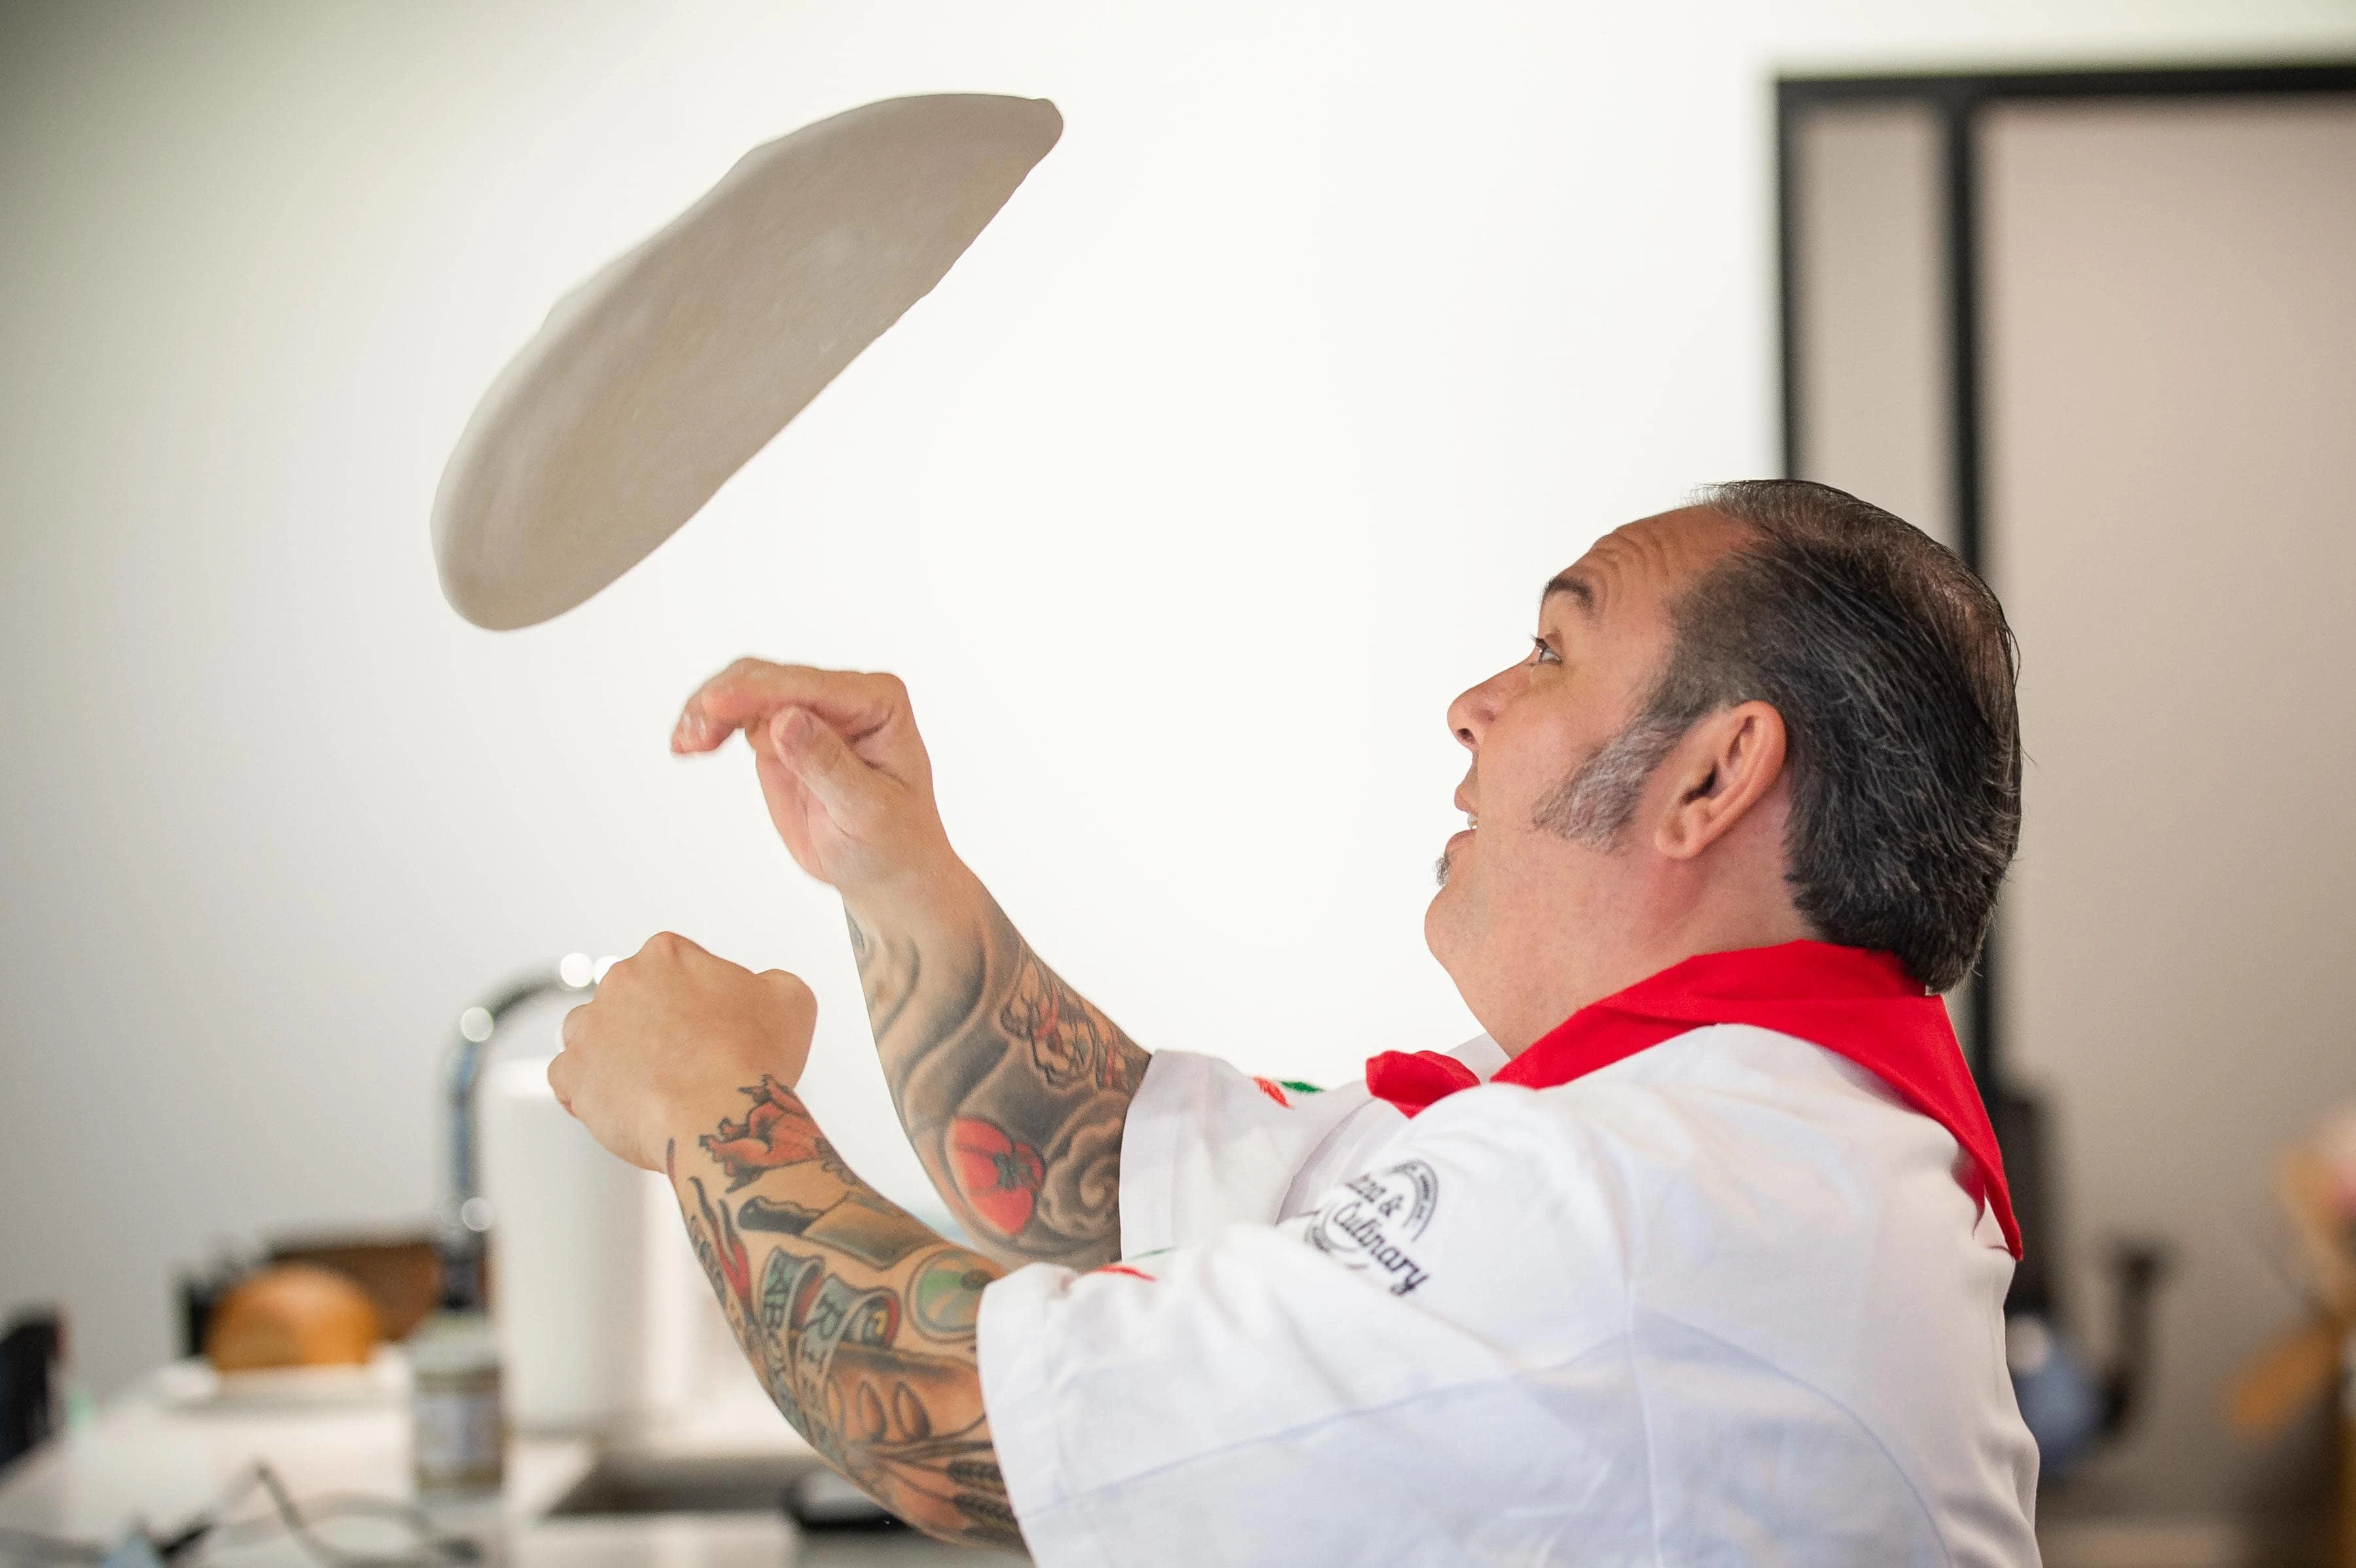 Chef Leo tossing pizza crust